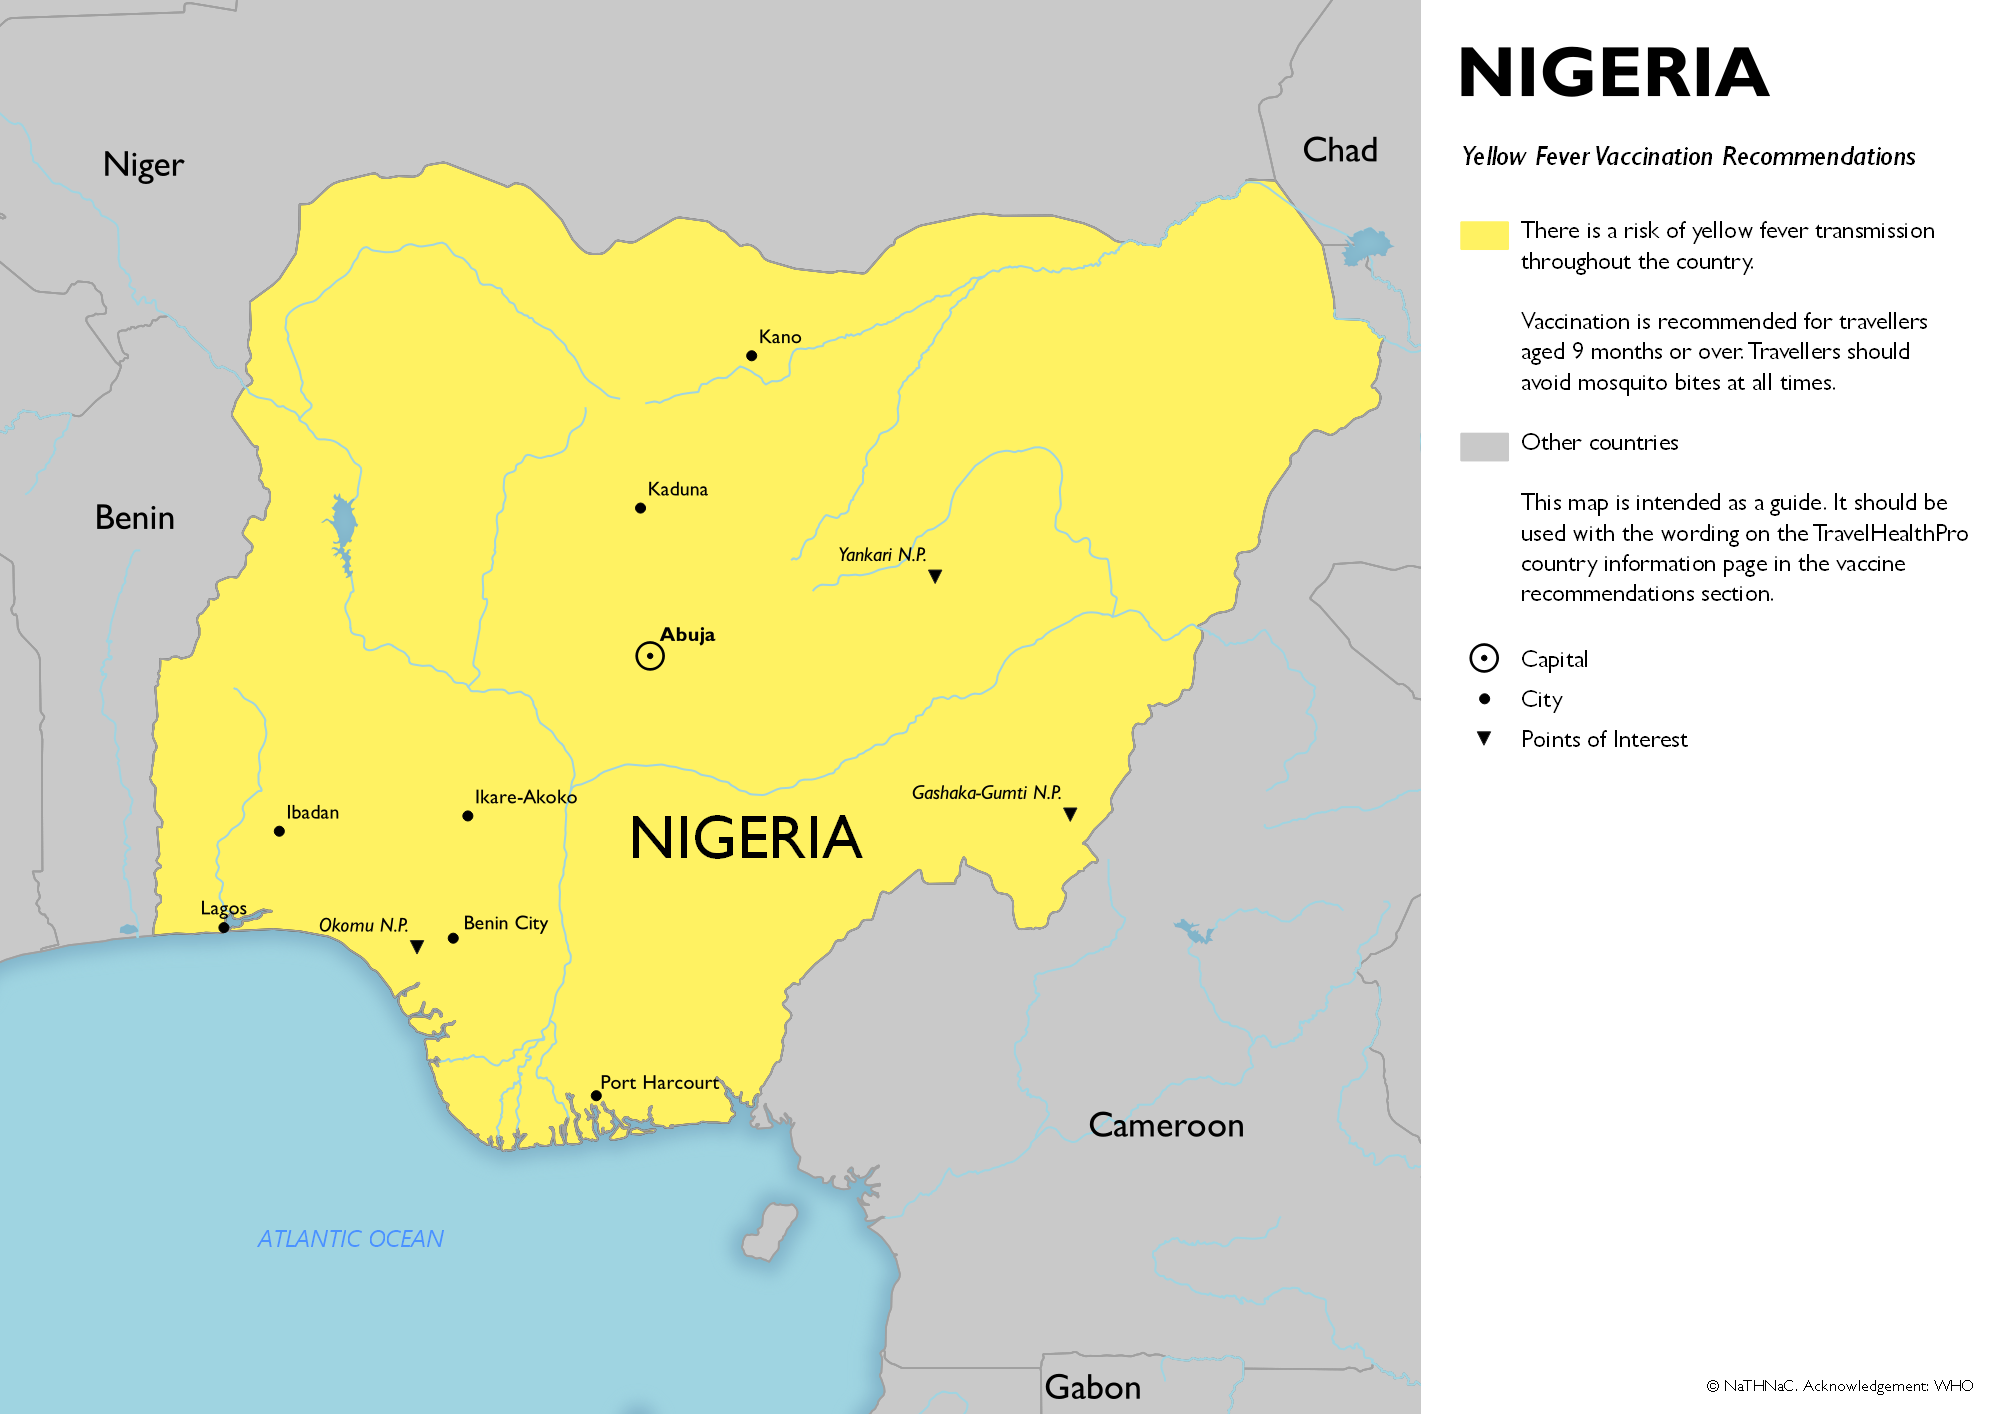 Yellow fever vaccine recommendation map for Nigeria